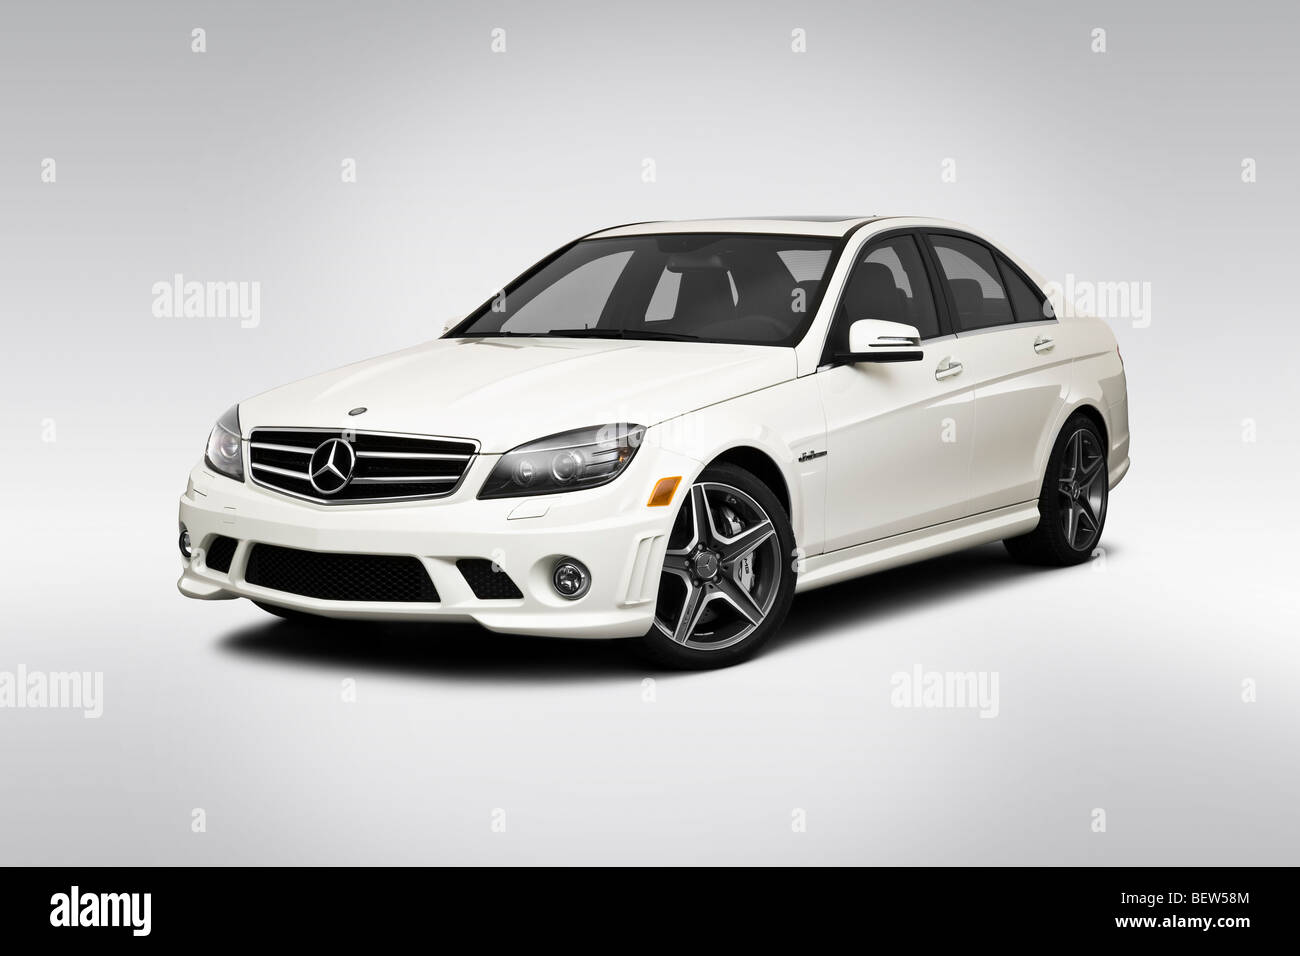 2010 Mercedes-Benz C-Class C63 AMG in White - Front angle view Stock Photo  - Alamy